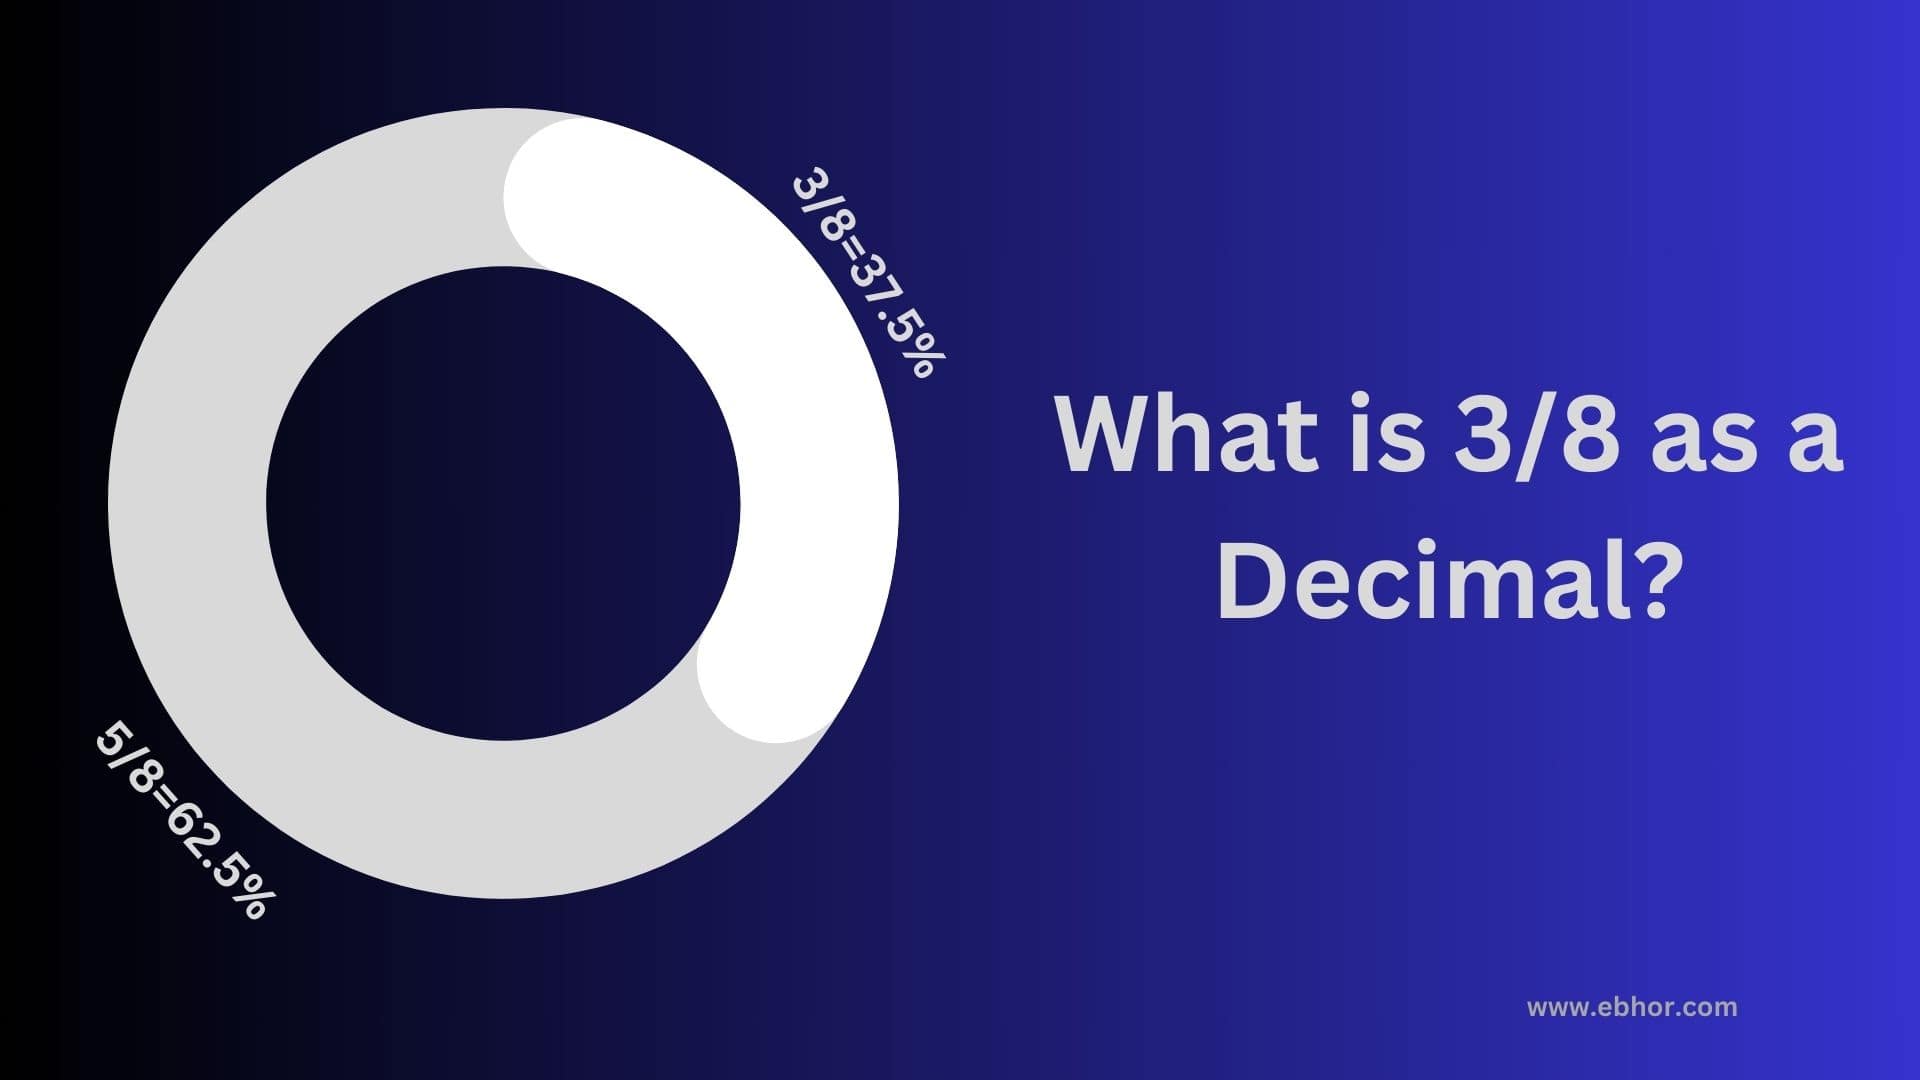 What is 3/8 as a Decimal